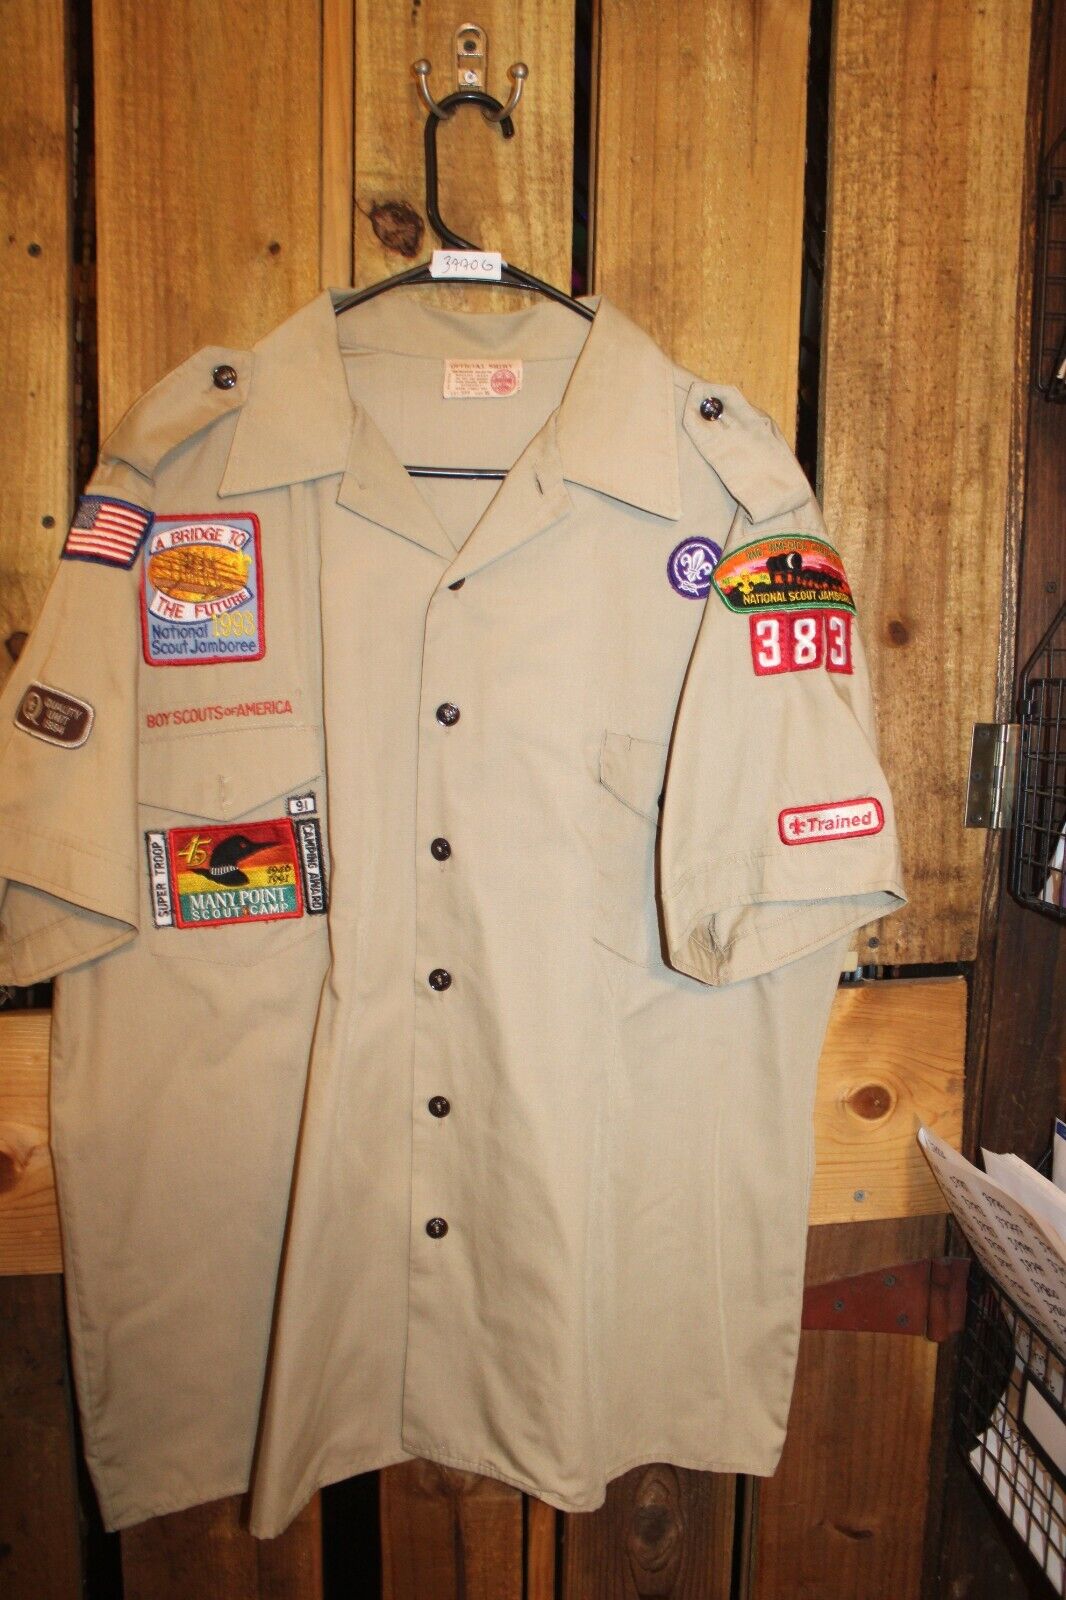 Boy Scouts of America BSA Men\'s Shirt XL LOTS of Sewn on patches Vintage